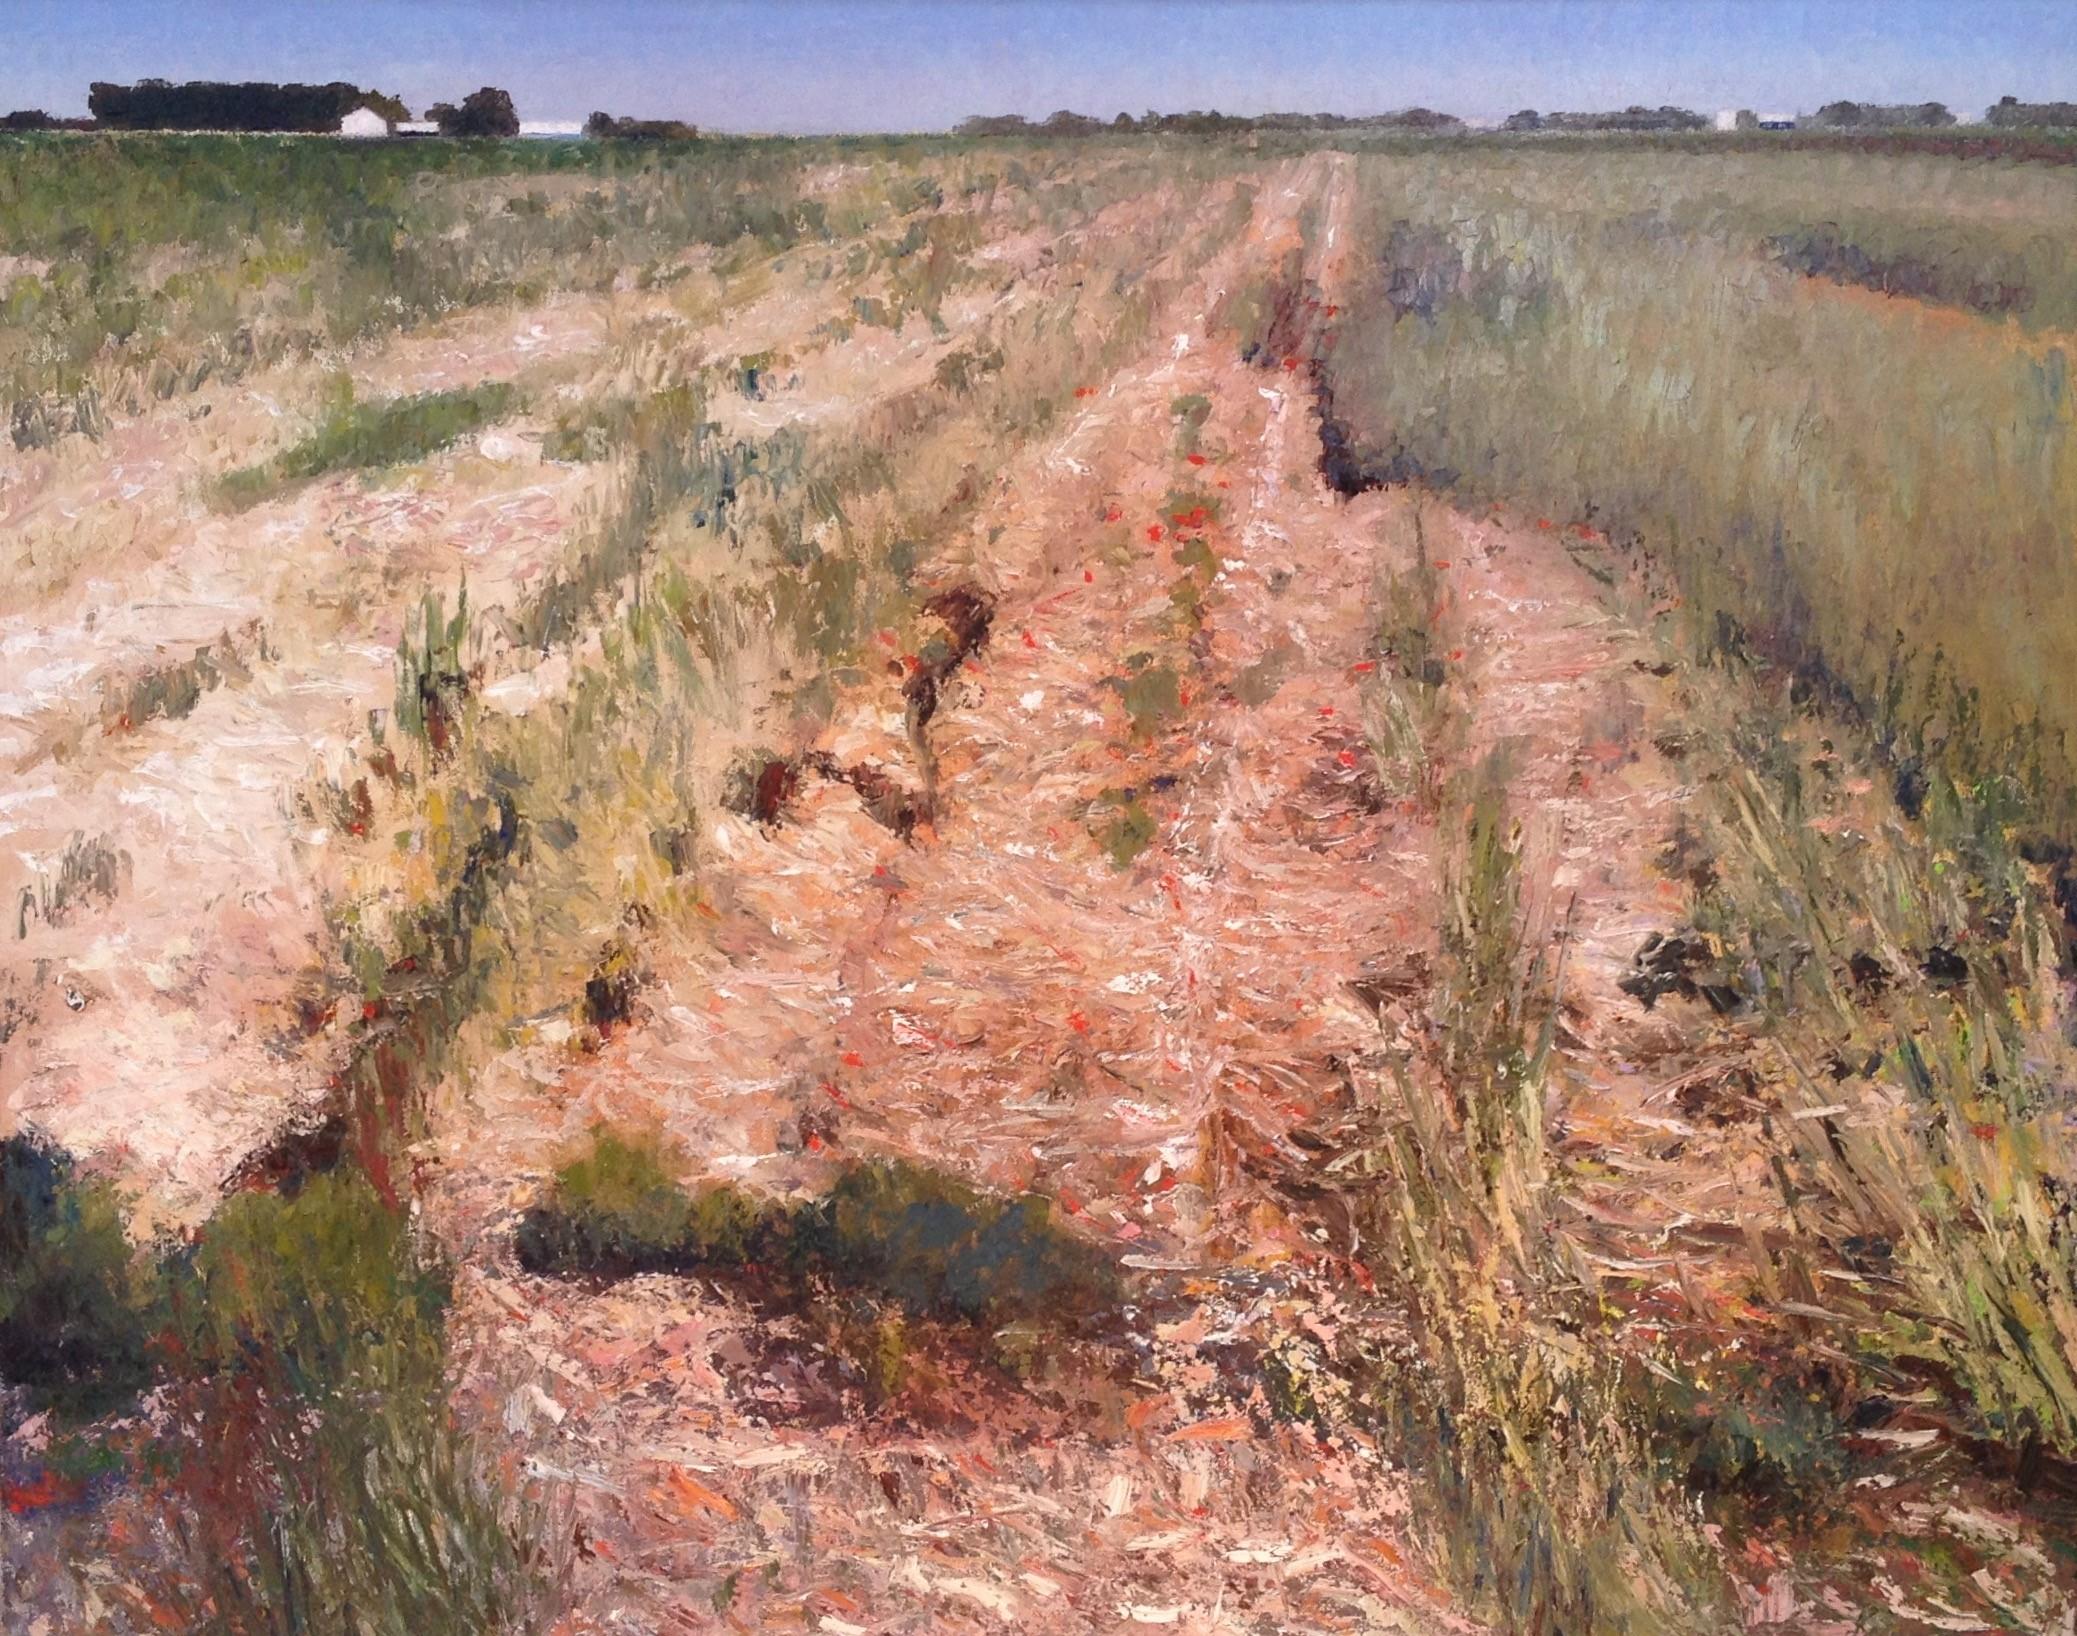 Gary Ernest Smith Landscape Painting - "Harvested Field"